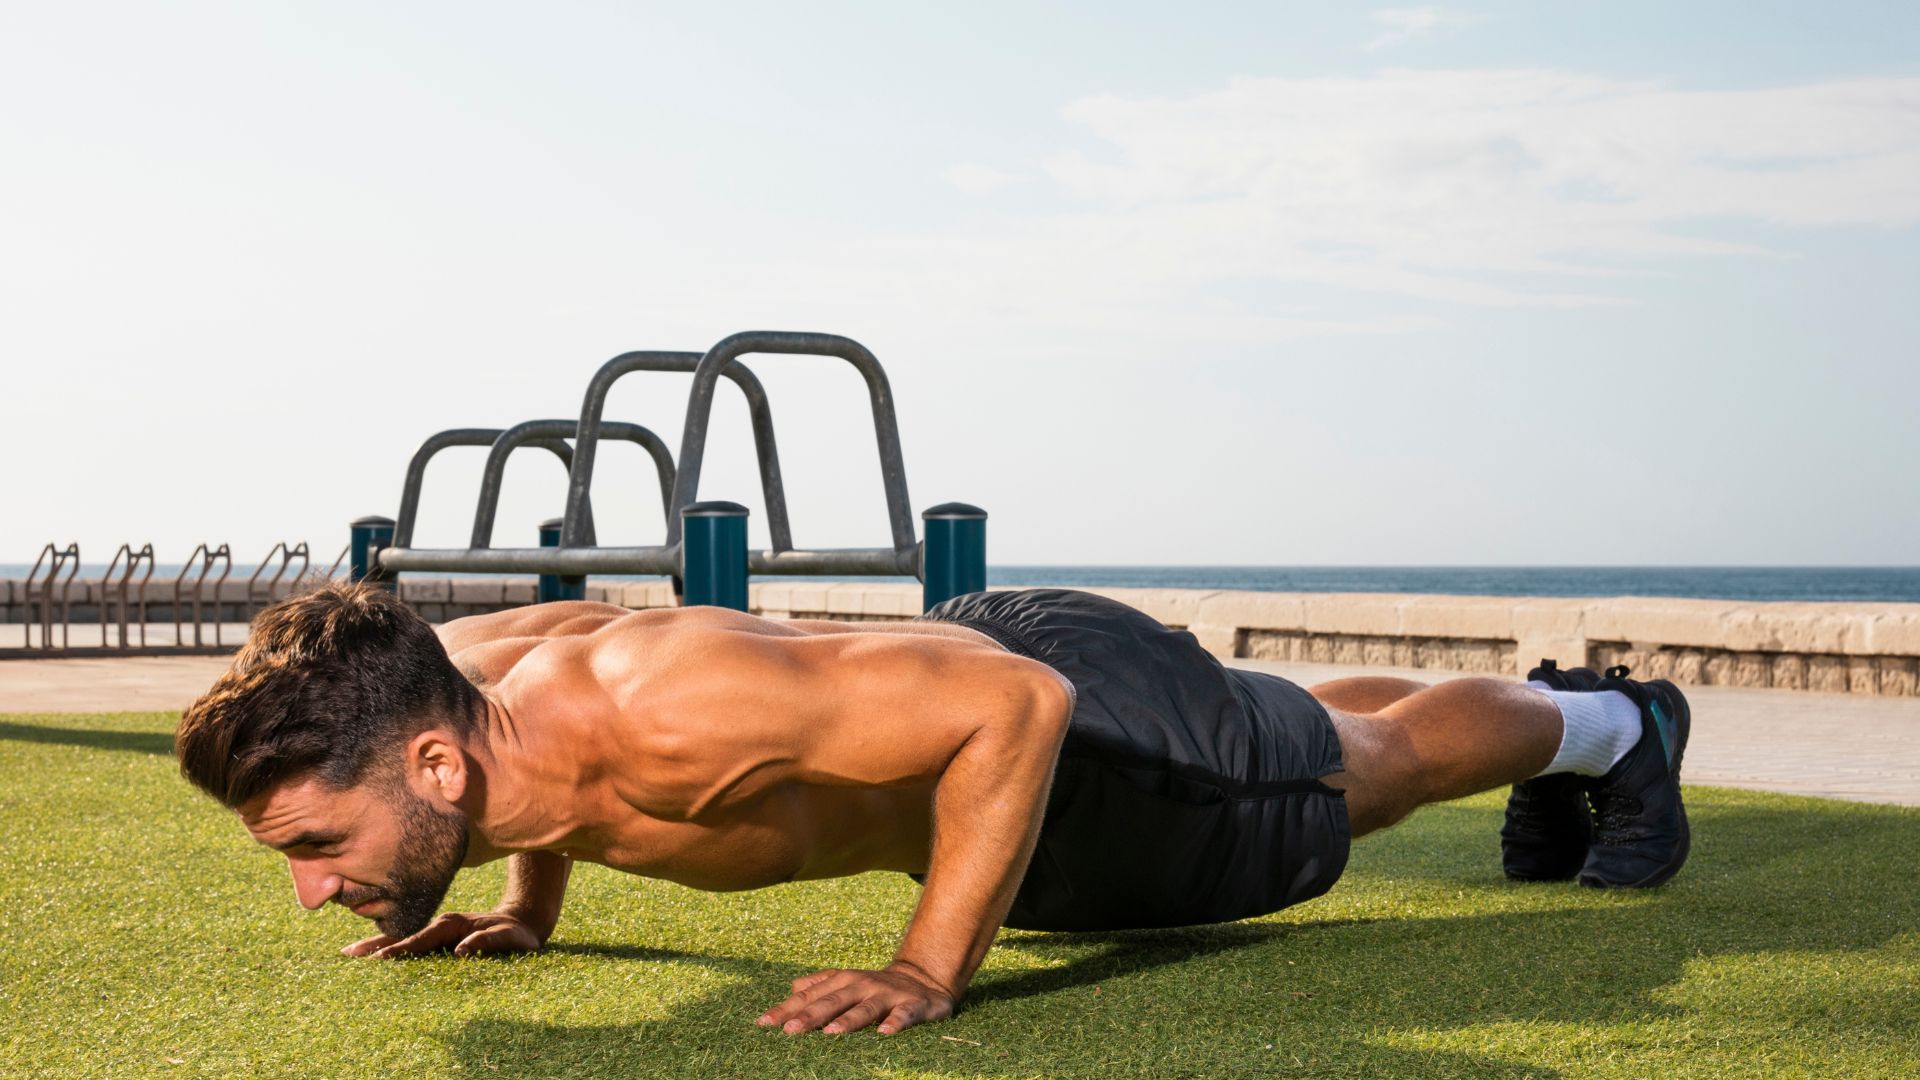 Can You attempt a pushup record with a history of anxiety: Explained